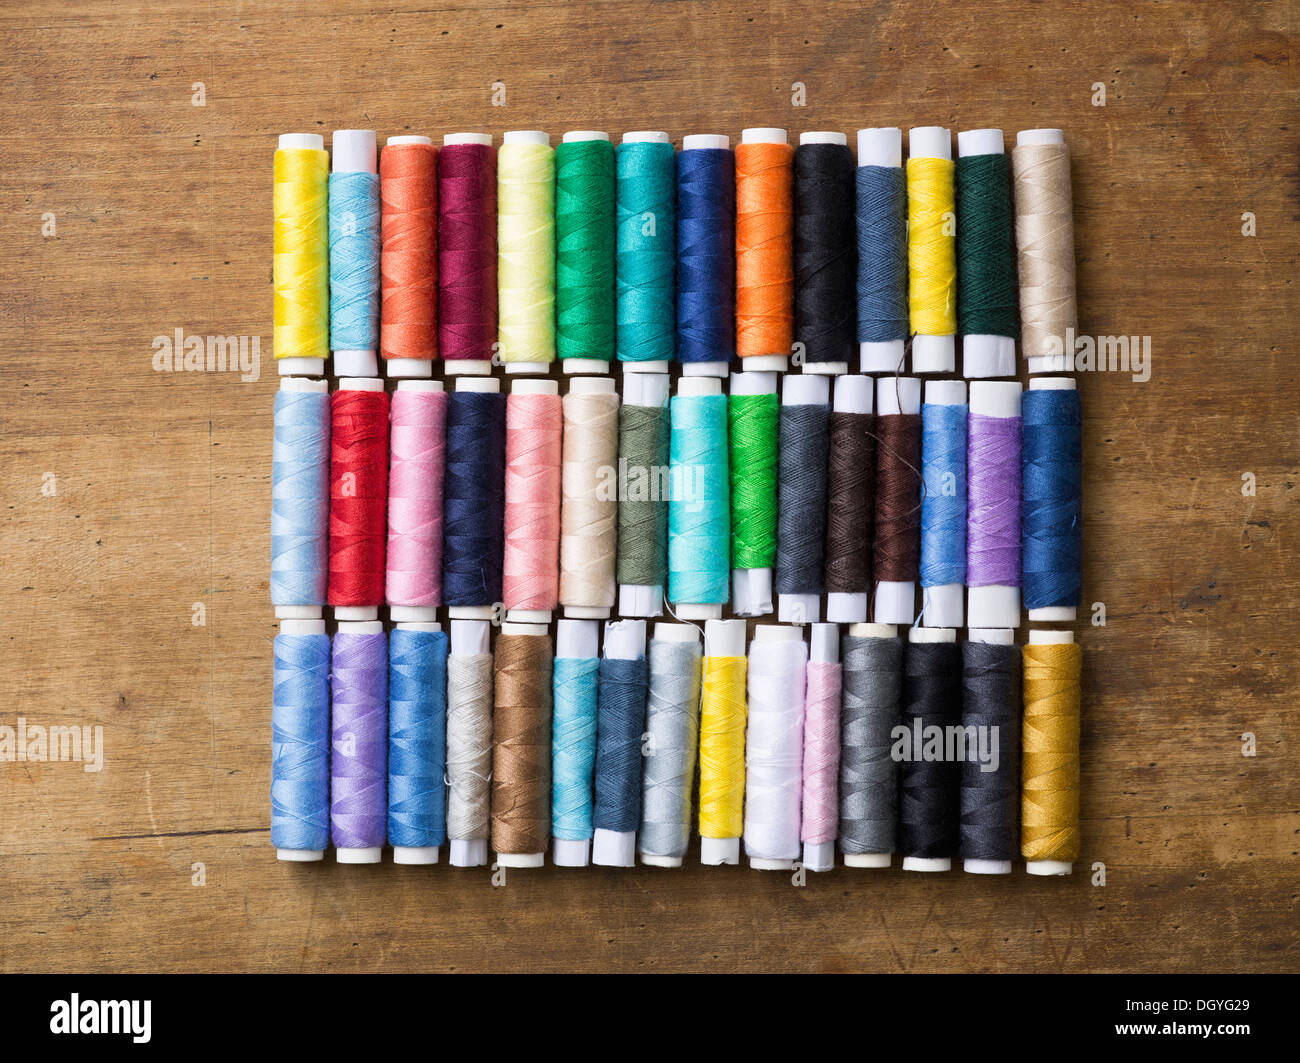 Rows of various colored spools of thread on a wooden table Stock Photo